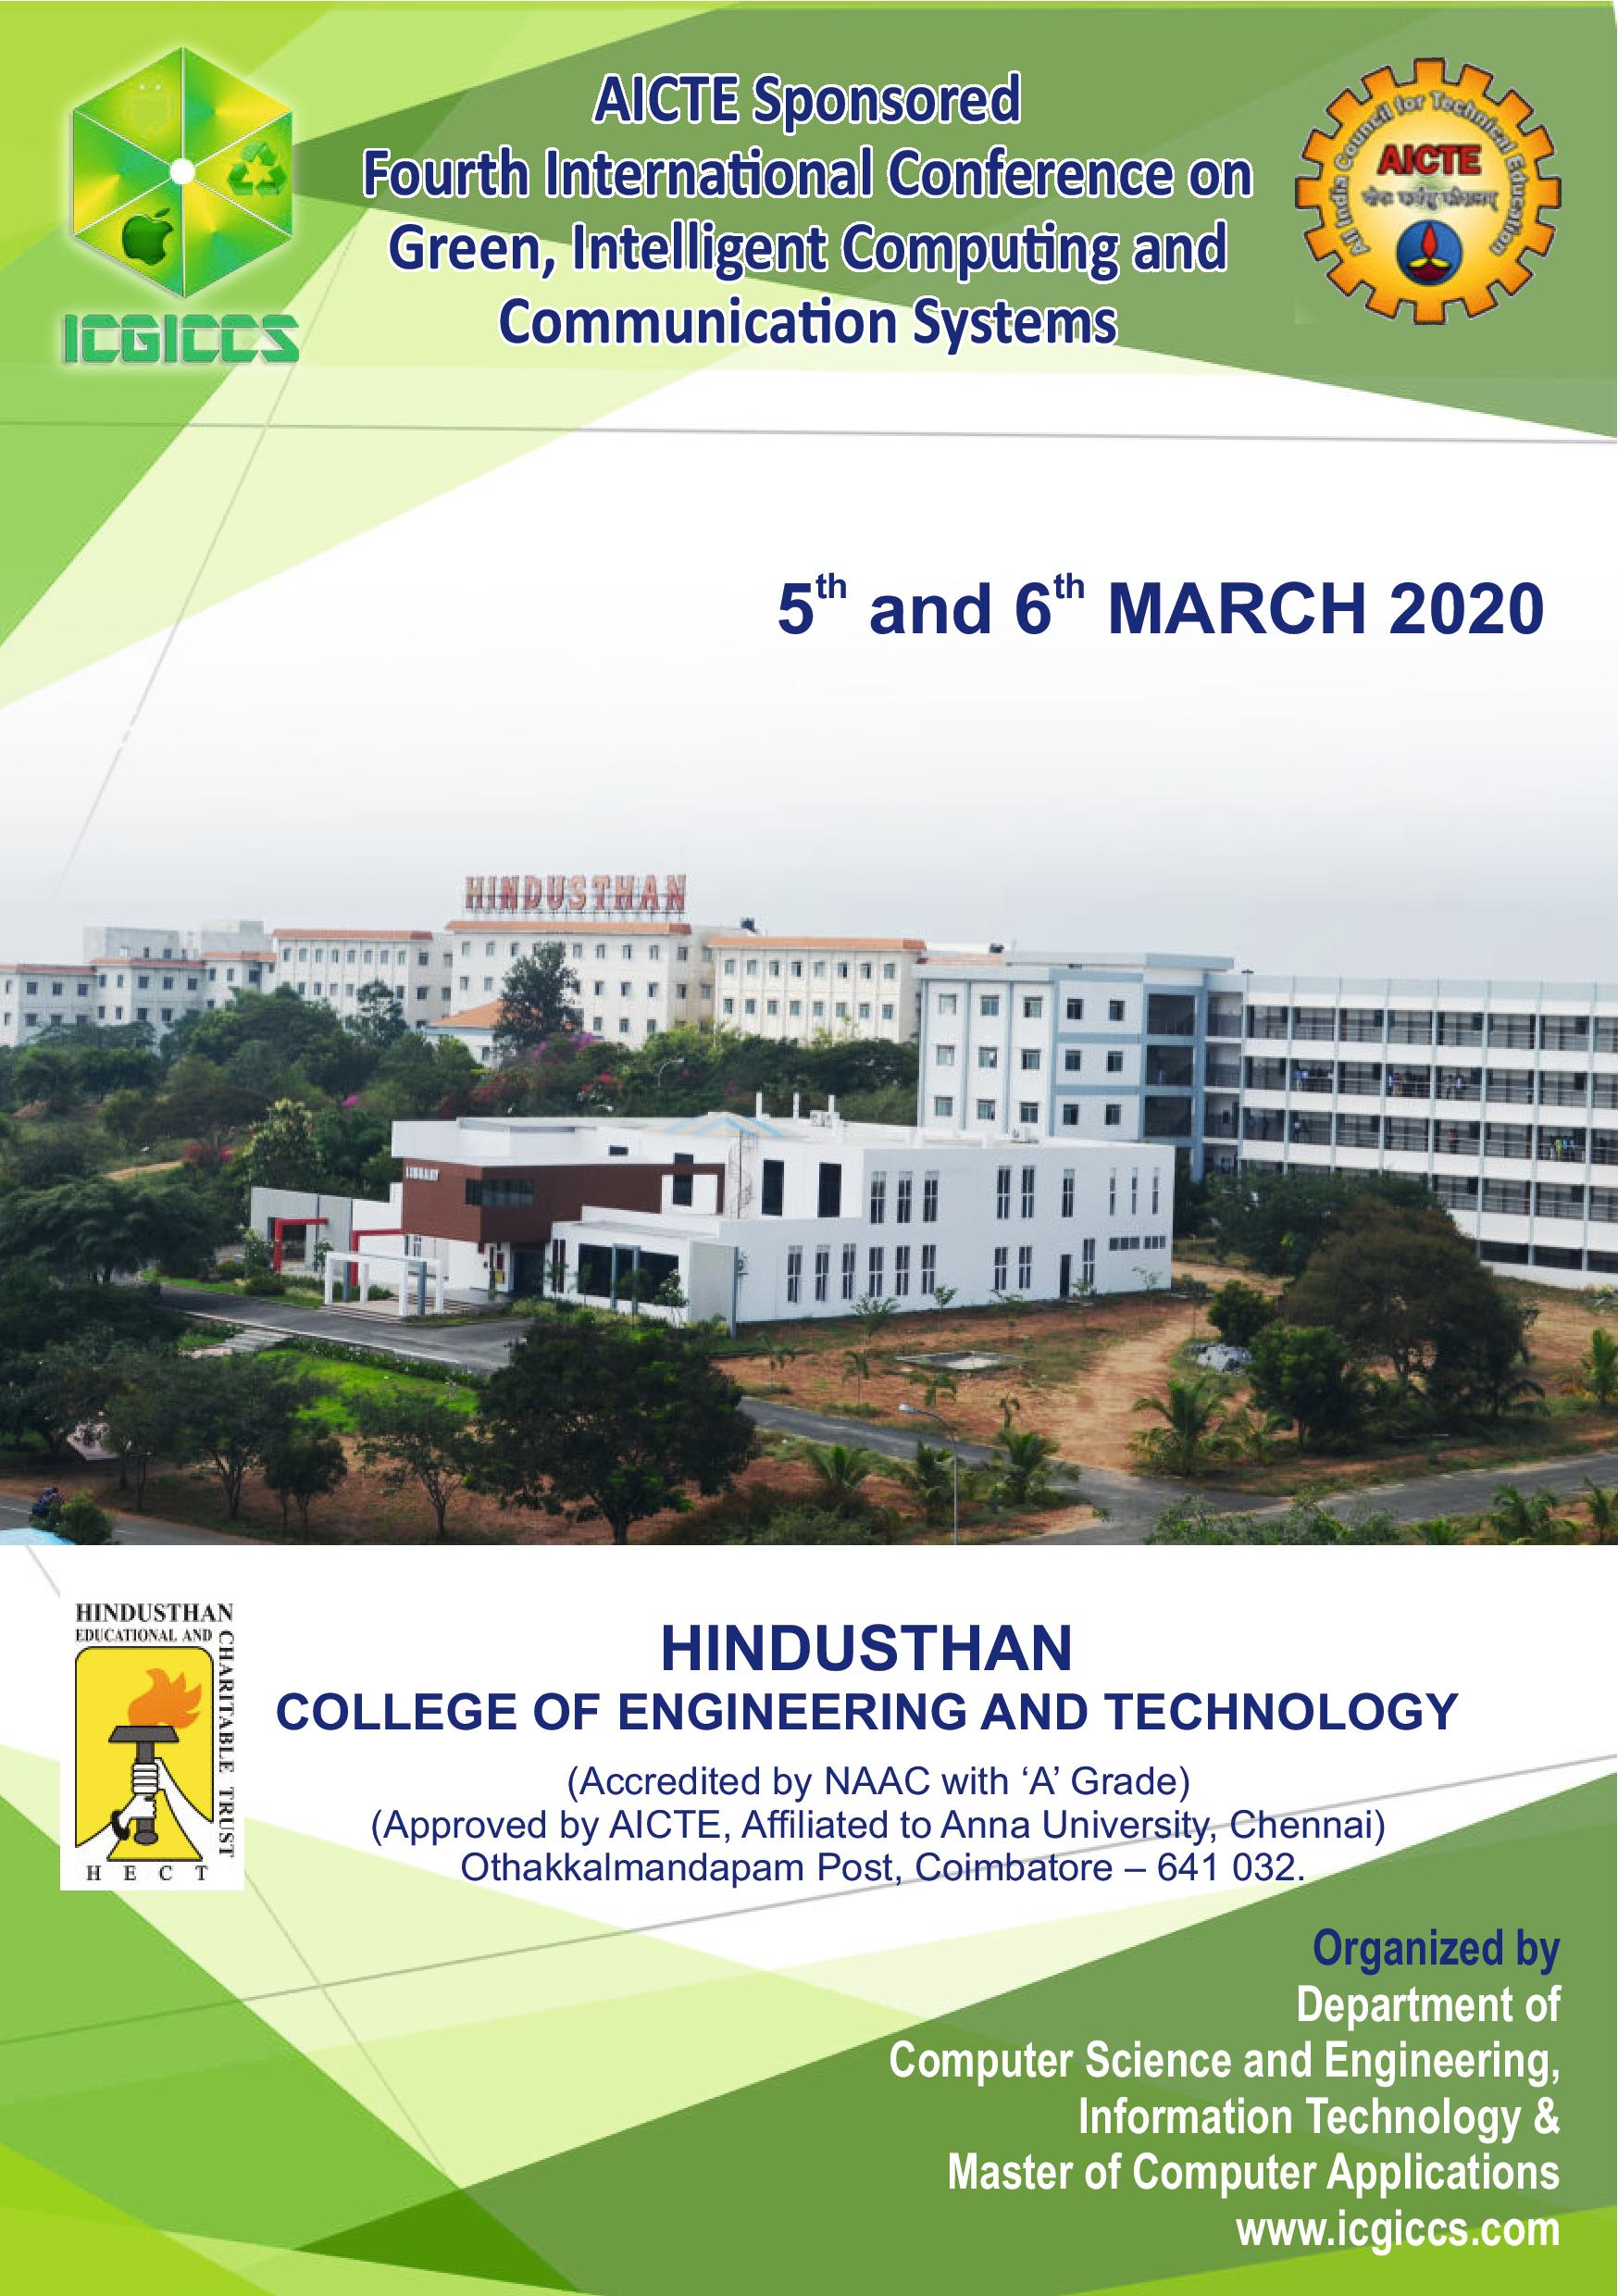 AICTE Sponsored International Conference on Green, Intelligent Computing and Communication Systems ICGICCS 2020